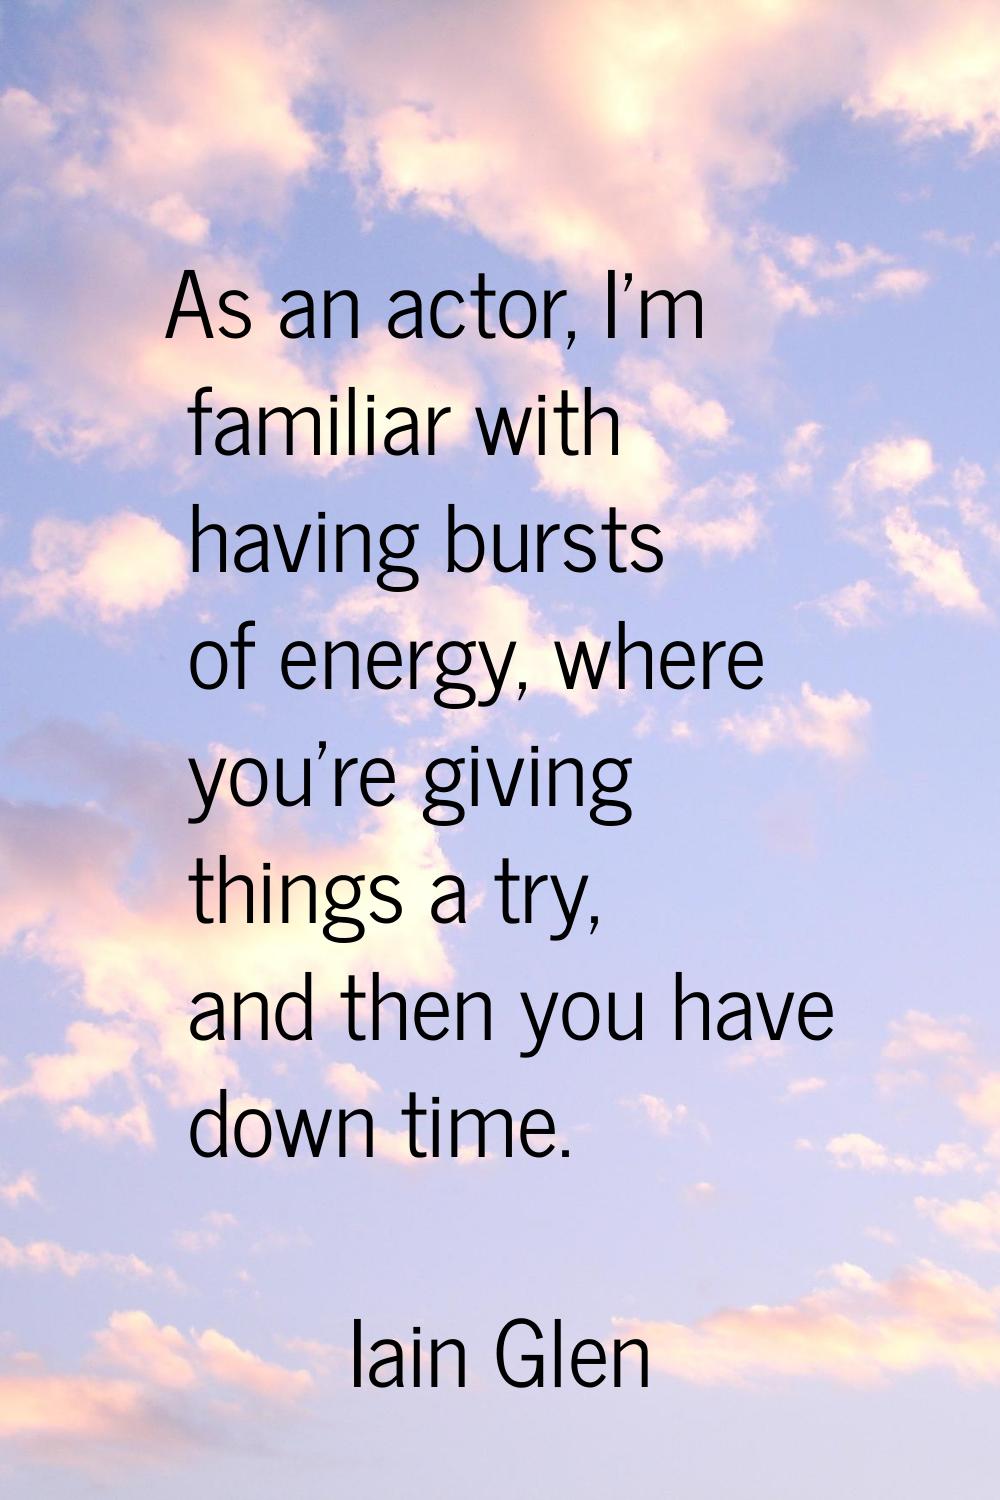 As an actor, I'm familiar with having bursts of energy, where you're giving things a try, and then 